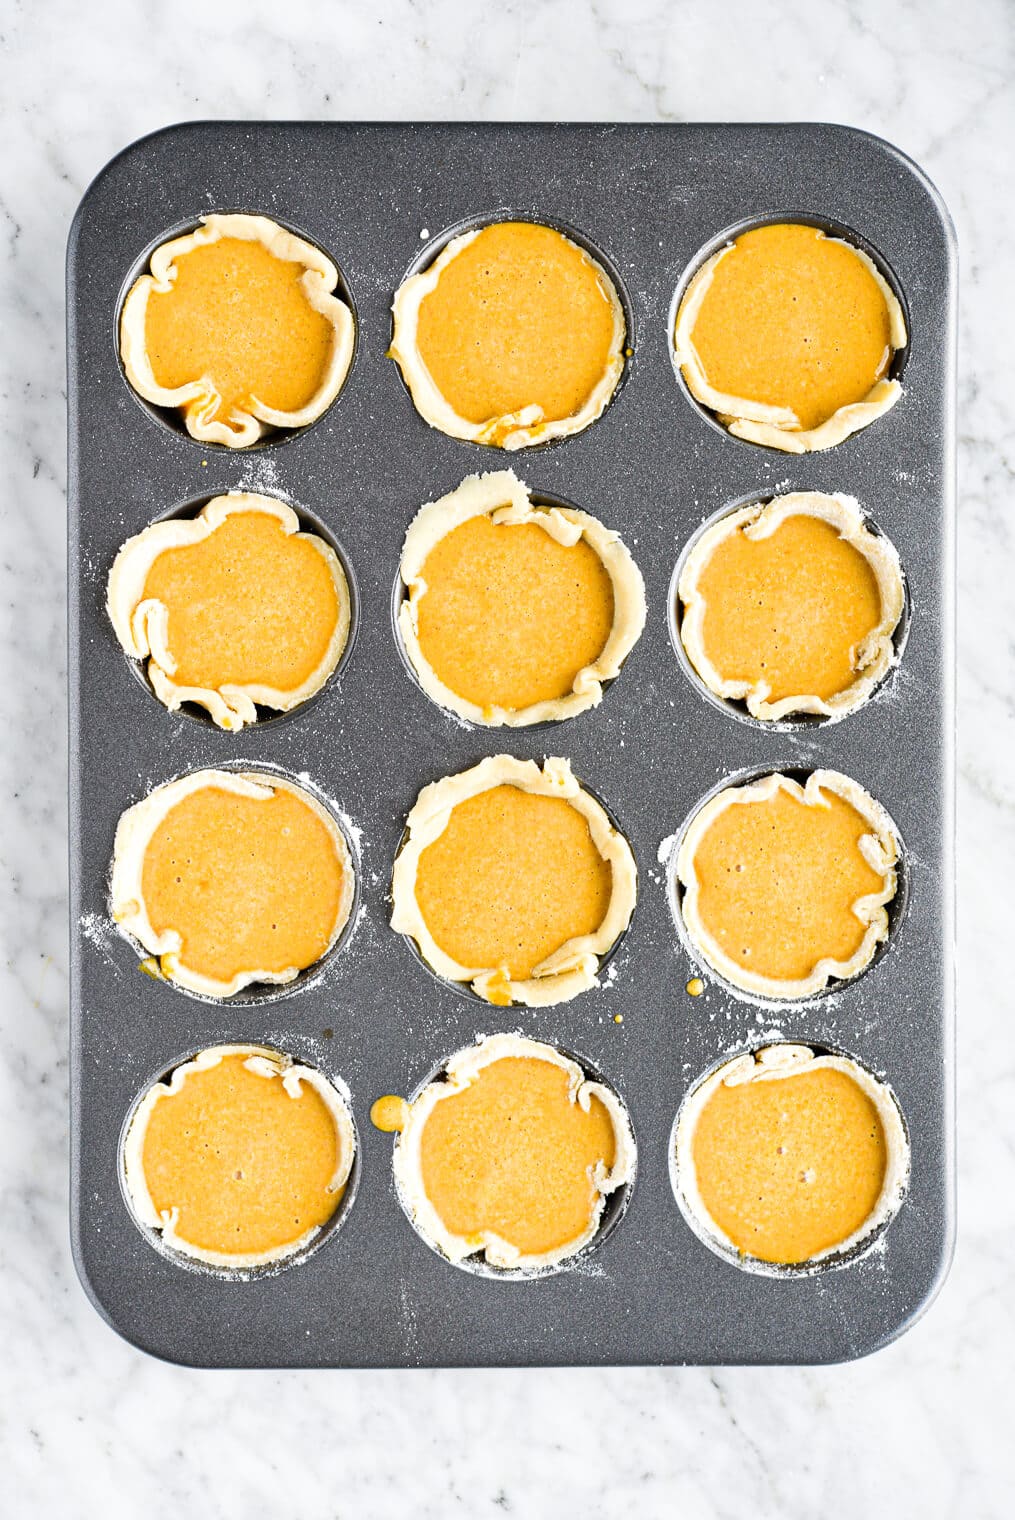 12 mini pumpkin pies filling up a muffin tin and ready to go into the oven